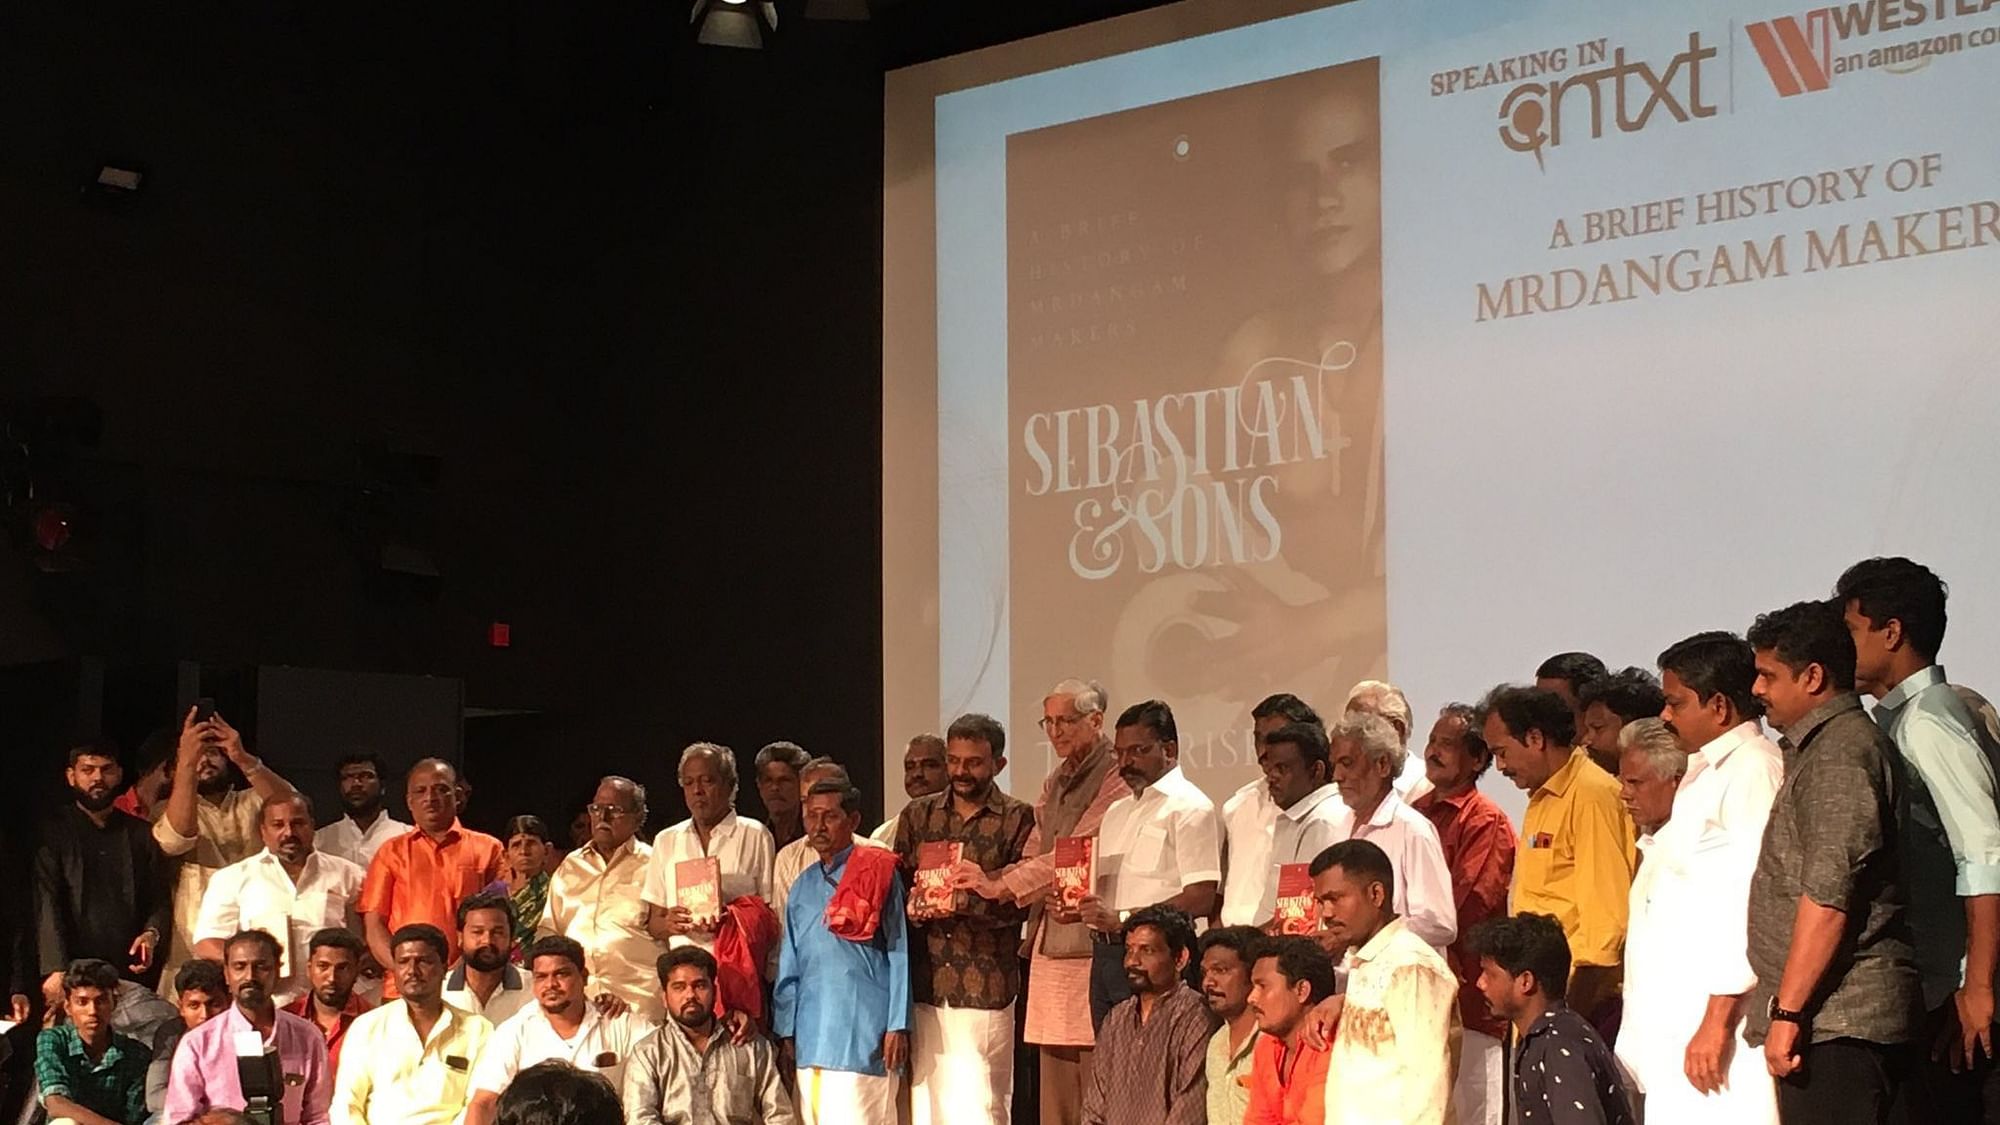 TM Krishna at his book launch event at the Asian College of Journalism in Chennai on 2 February.